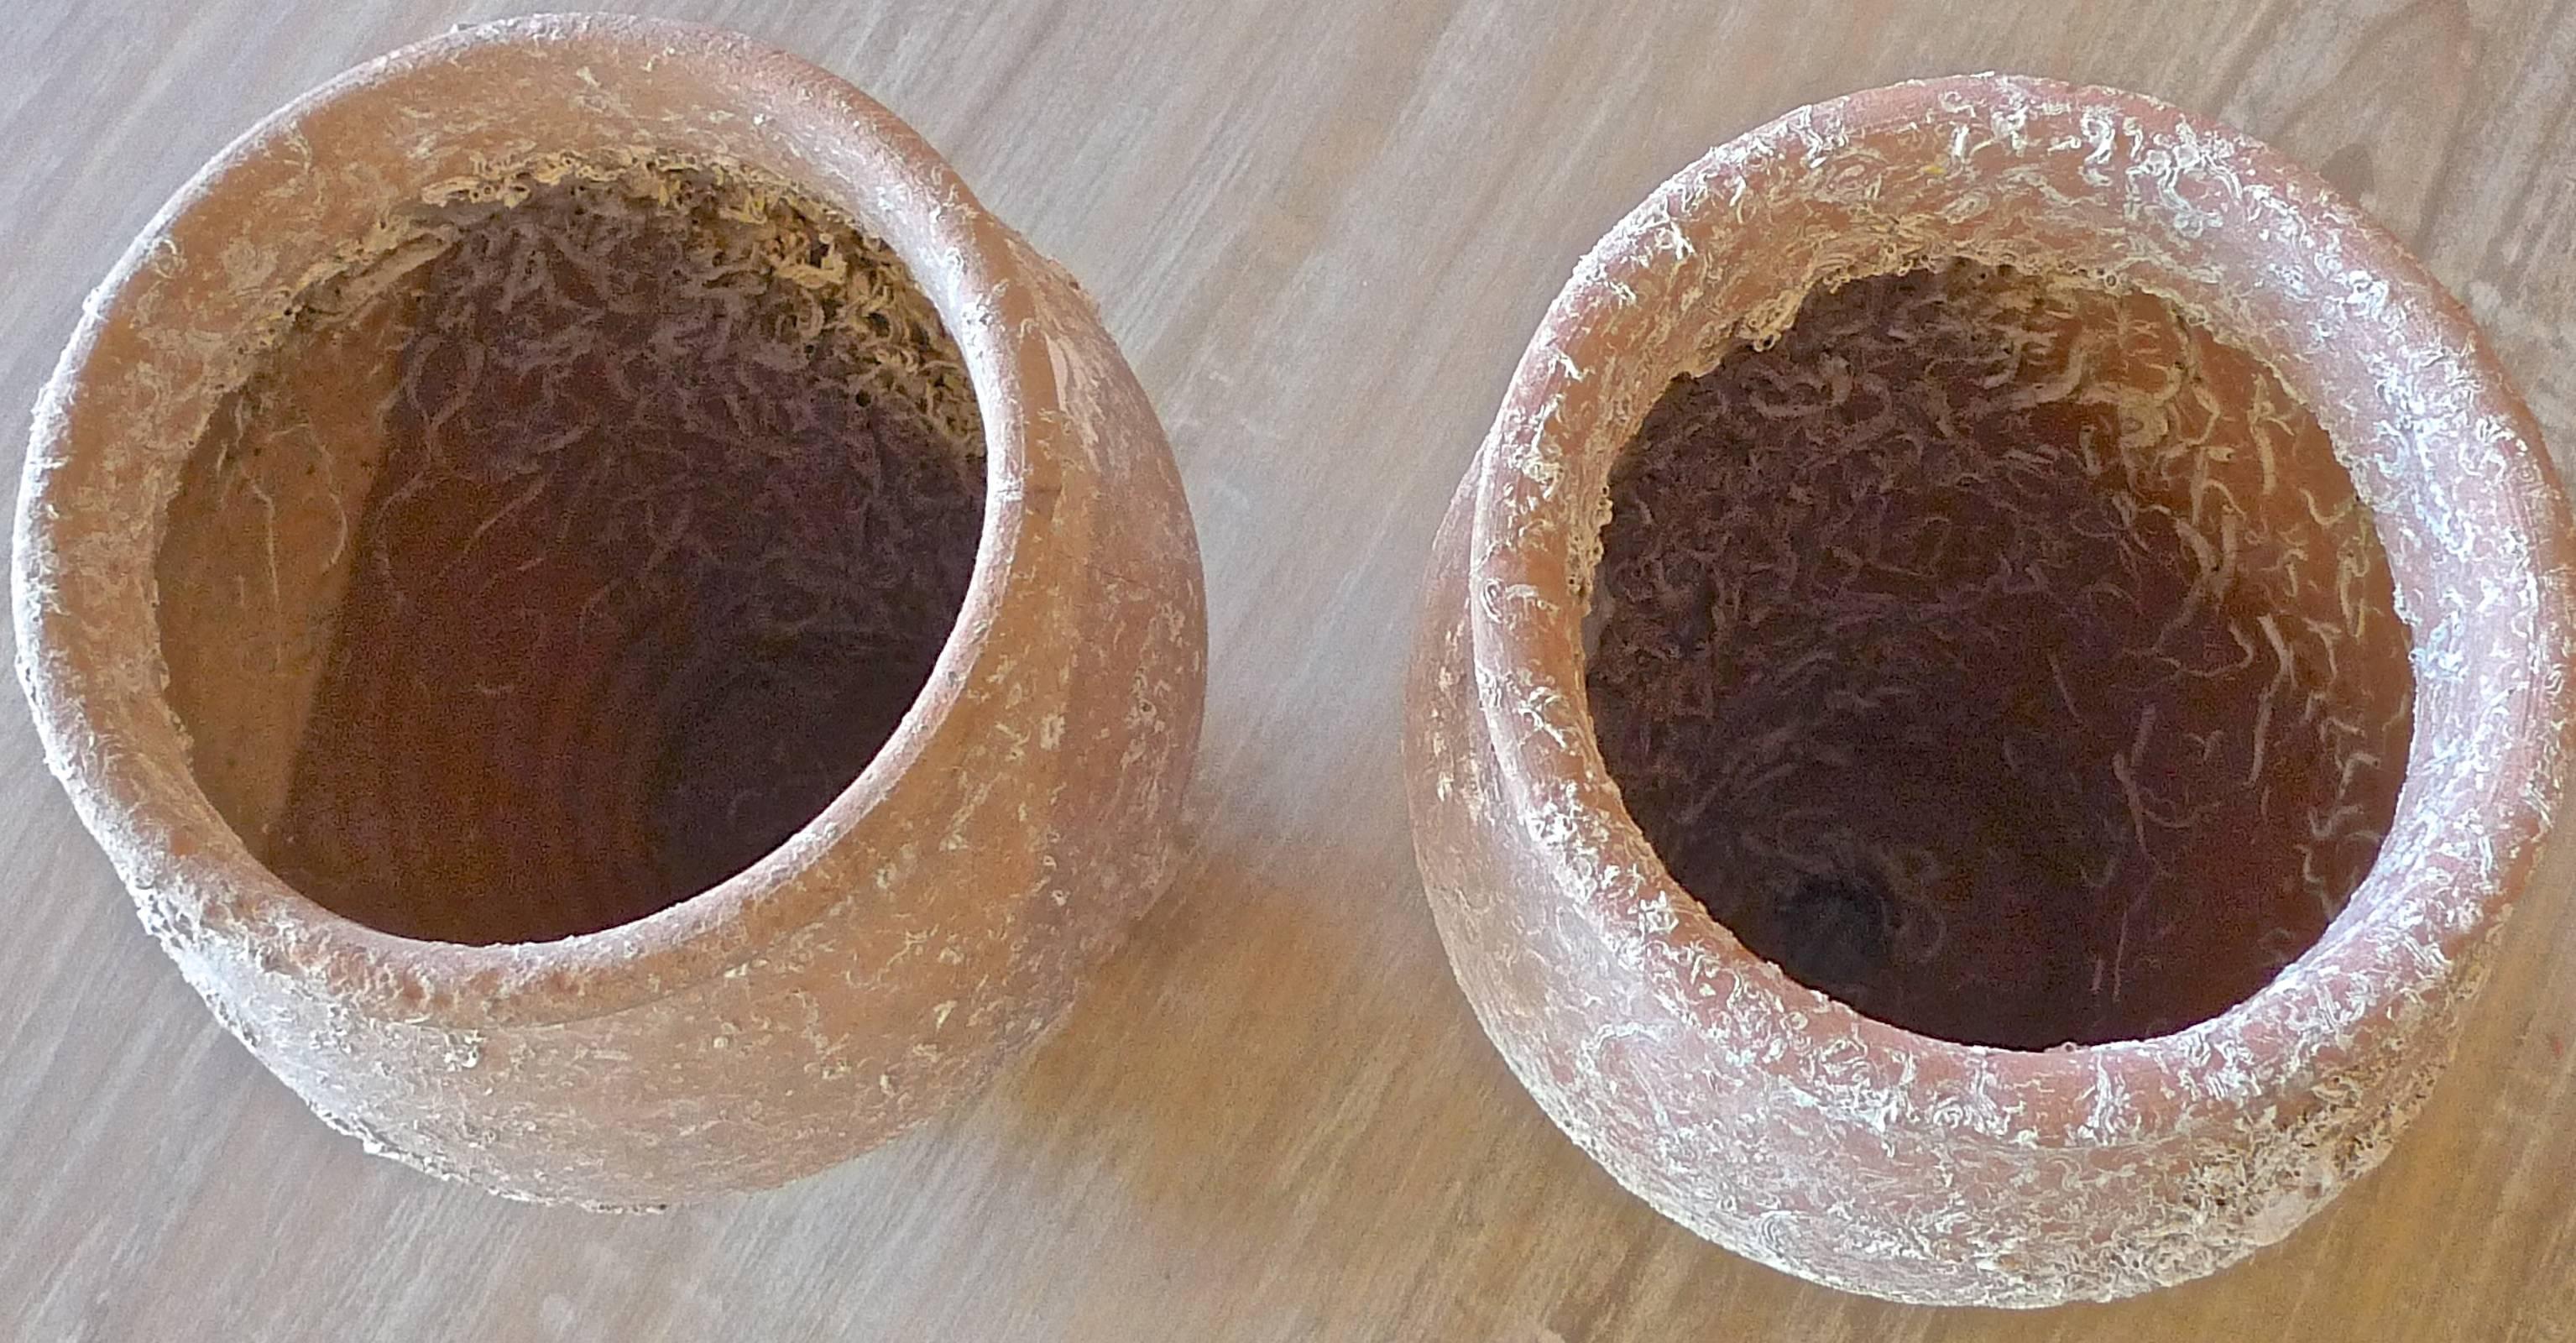 Two French 19th century terra cotta pots submerged in the Mediterranean sea.